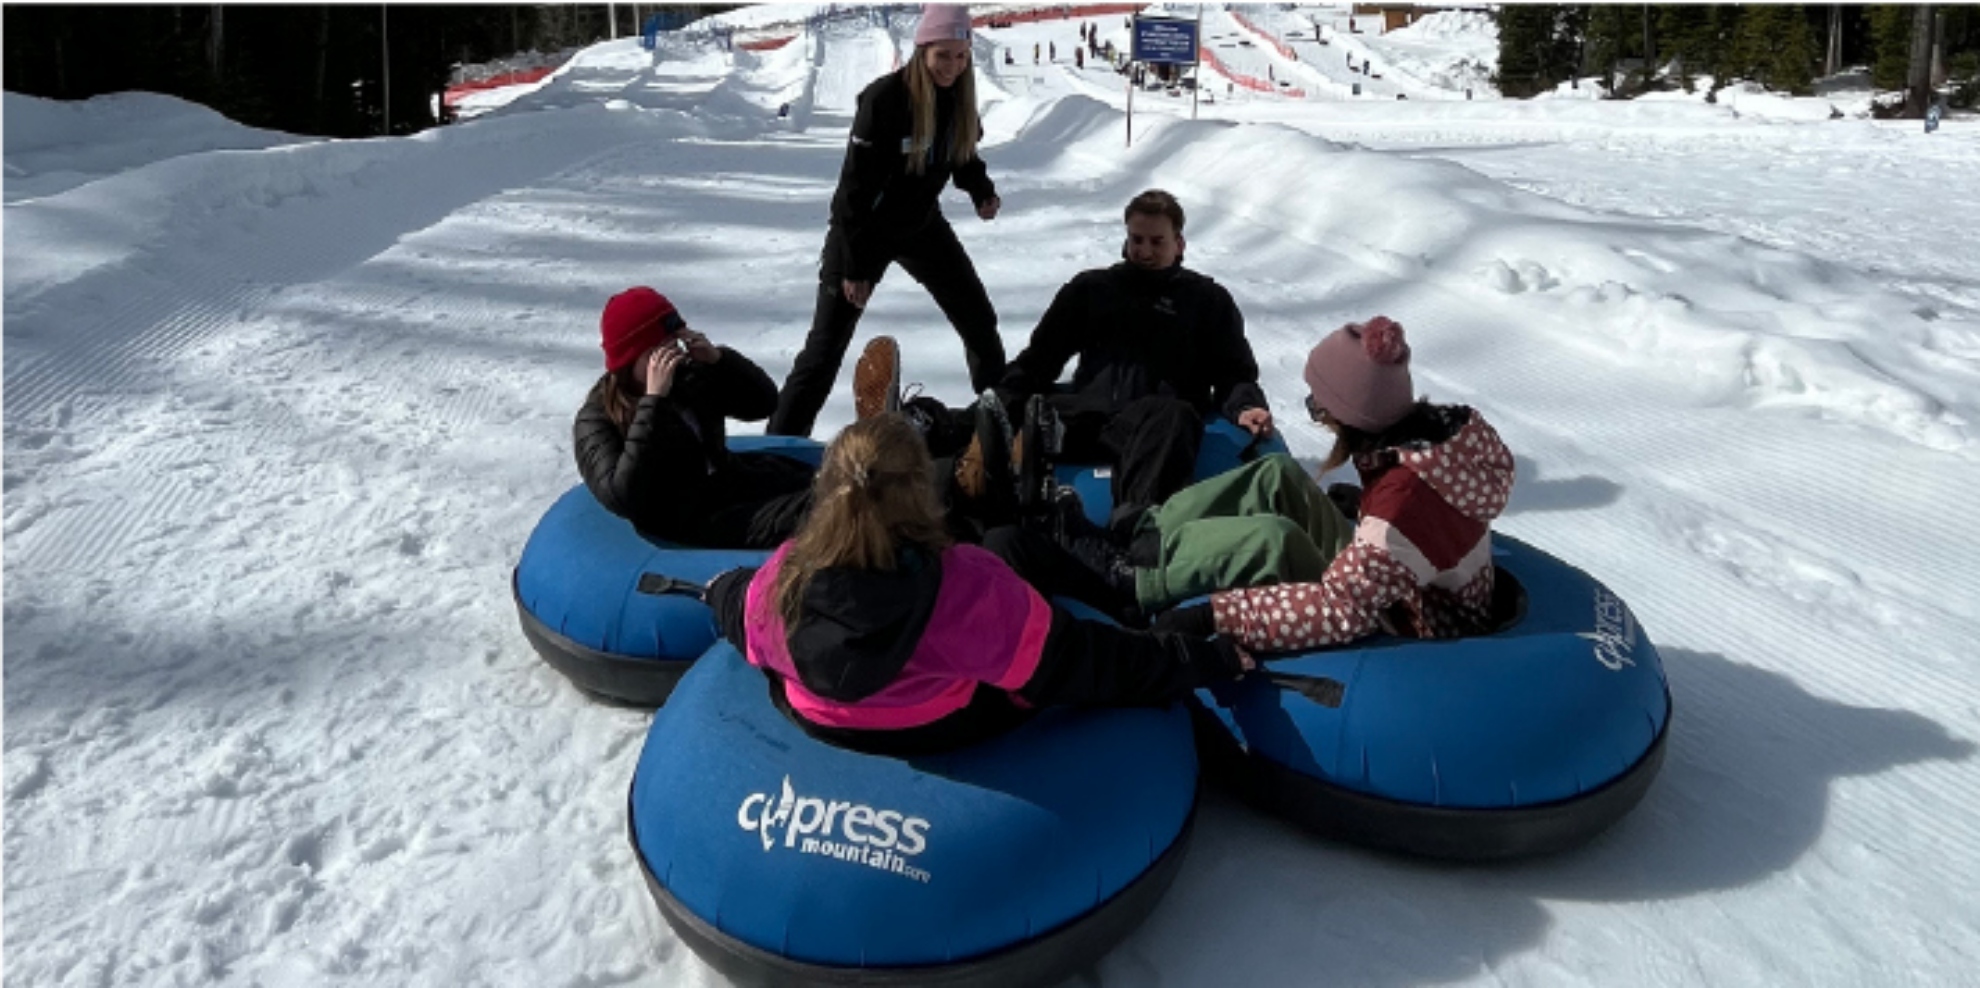 Tubing | with Sky Card